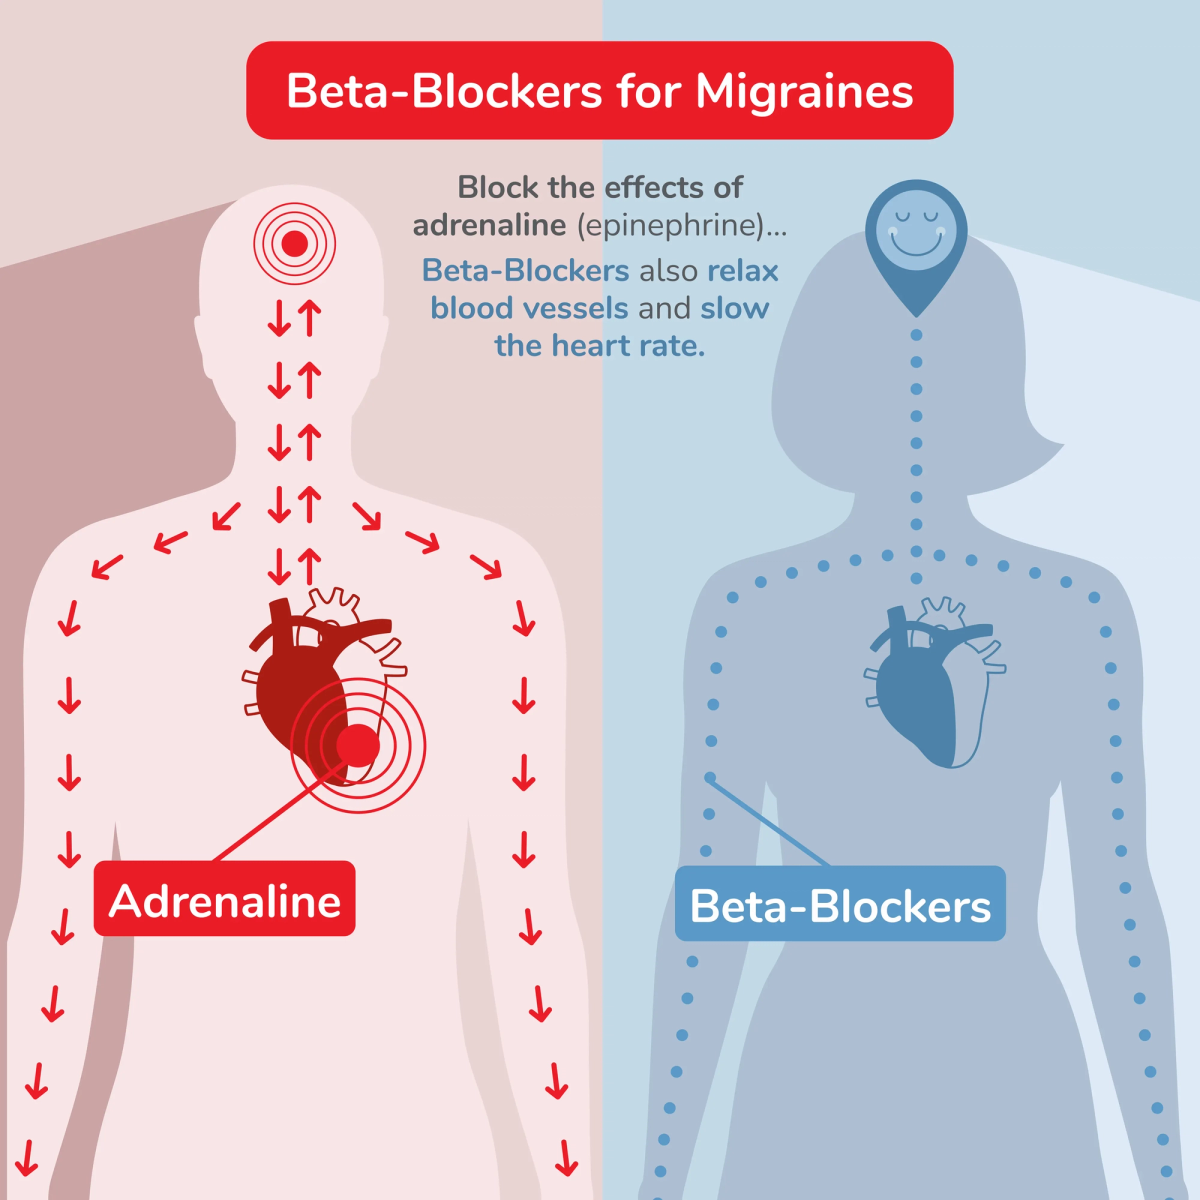 Illustration of Beta-Blockers Working in a Body